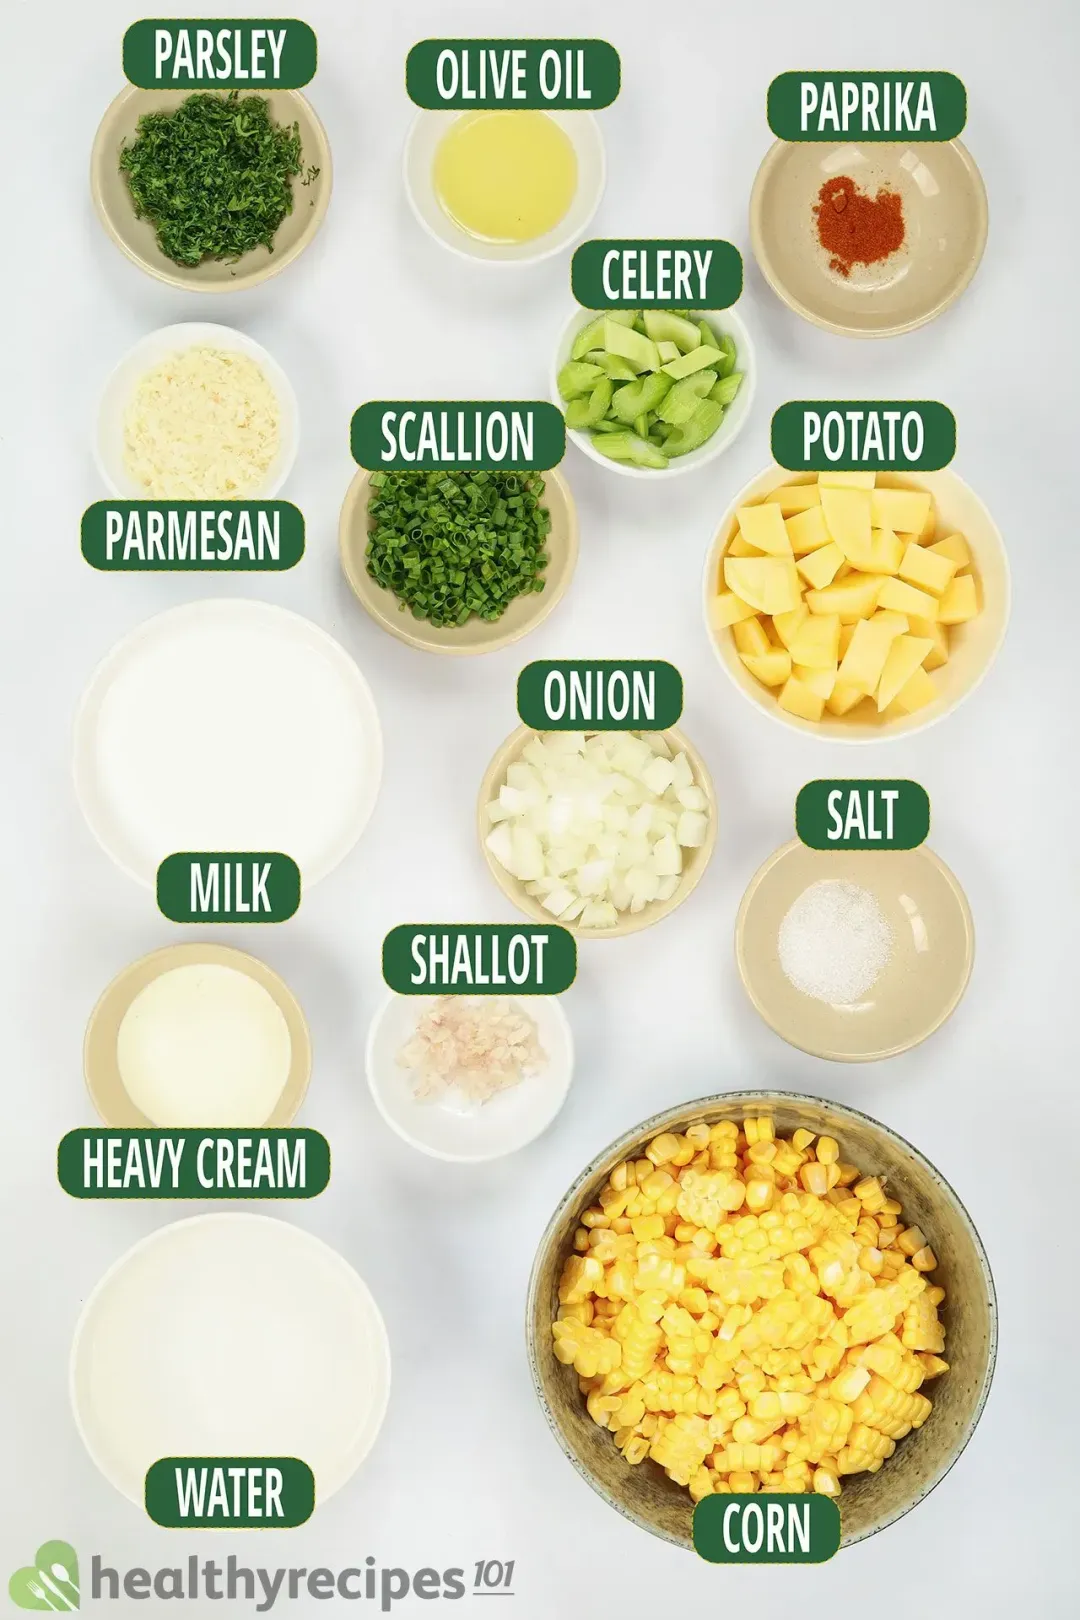 Ingredients for Corn Soup